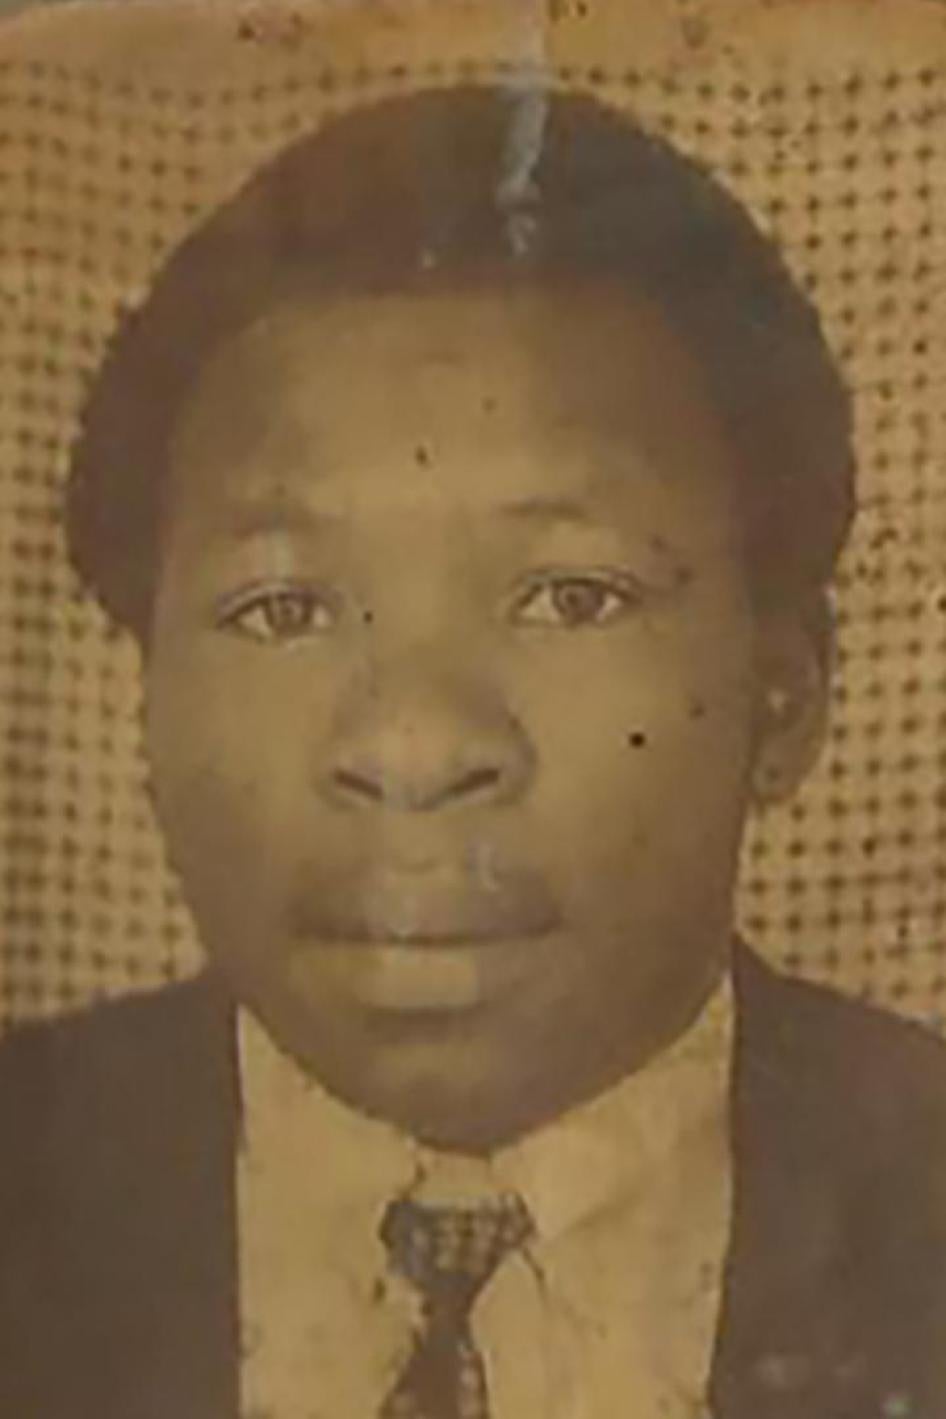 Thaddée Uwintwali was executed on December 13, 2016.